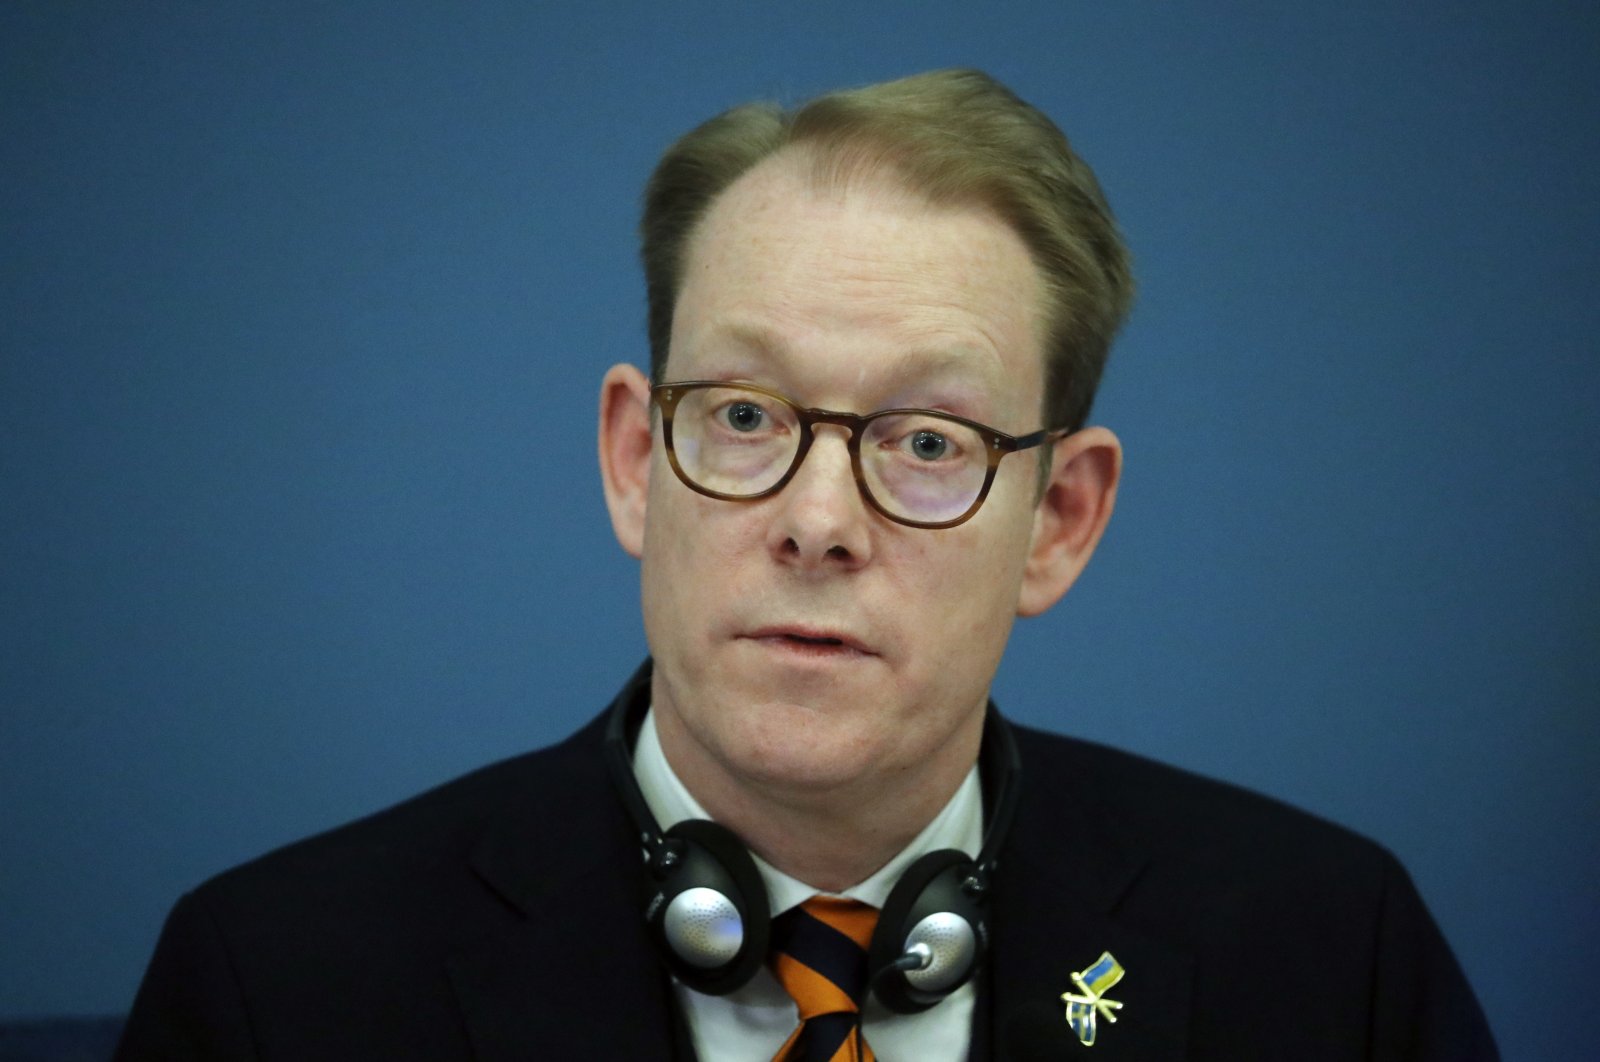 Swedish Foreign Minister Tobias Billstrom attends a press conference after his meeting with Latvian Foreign Minister Edgars Rinkevics (not pictured) in Riga, Latvia, Jan. 27, 2023. (EPA Photo)